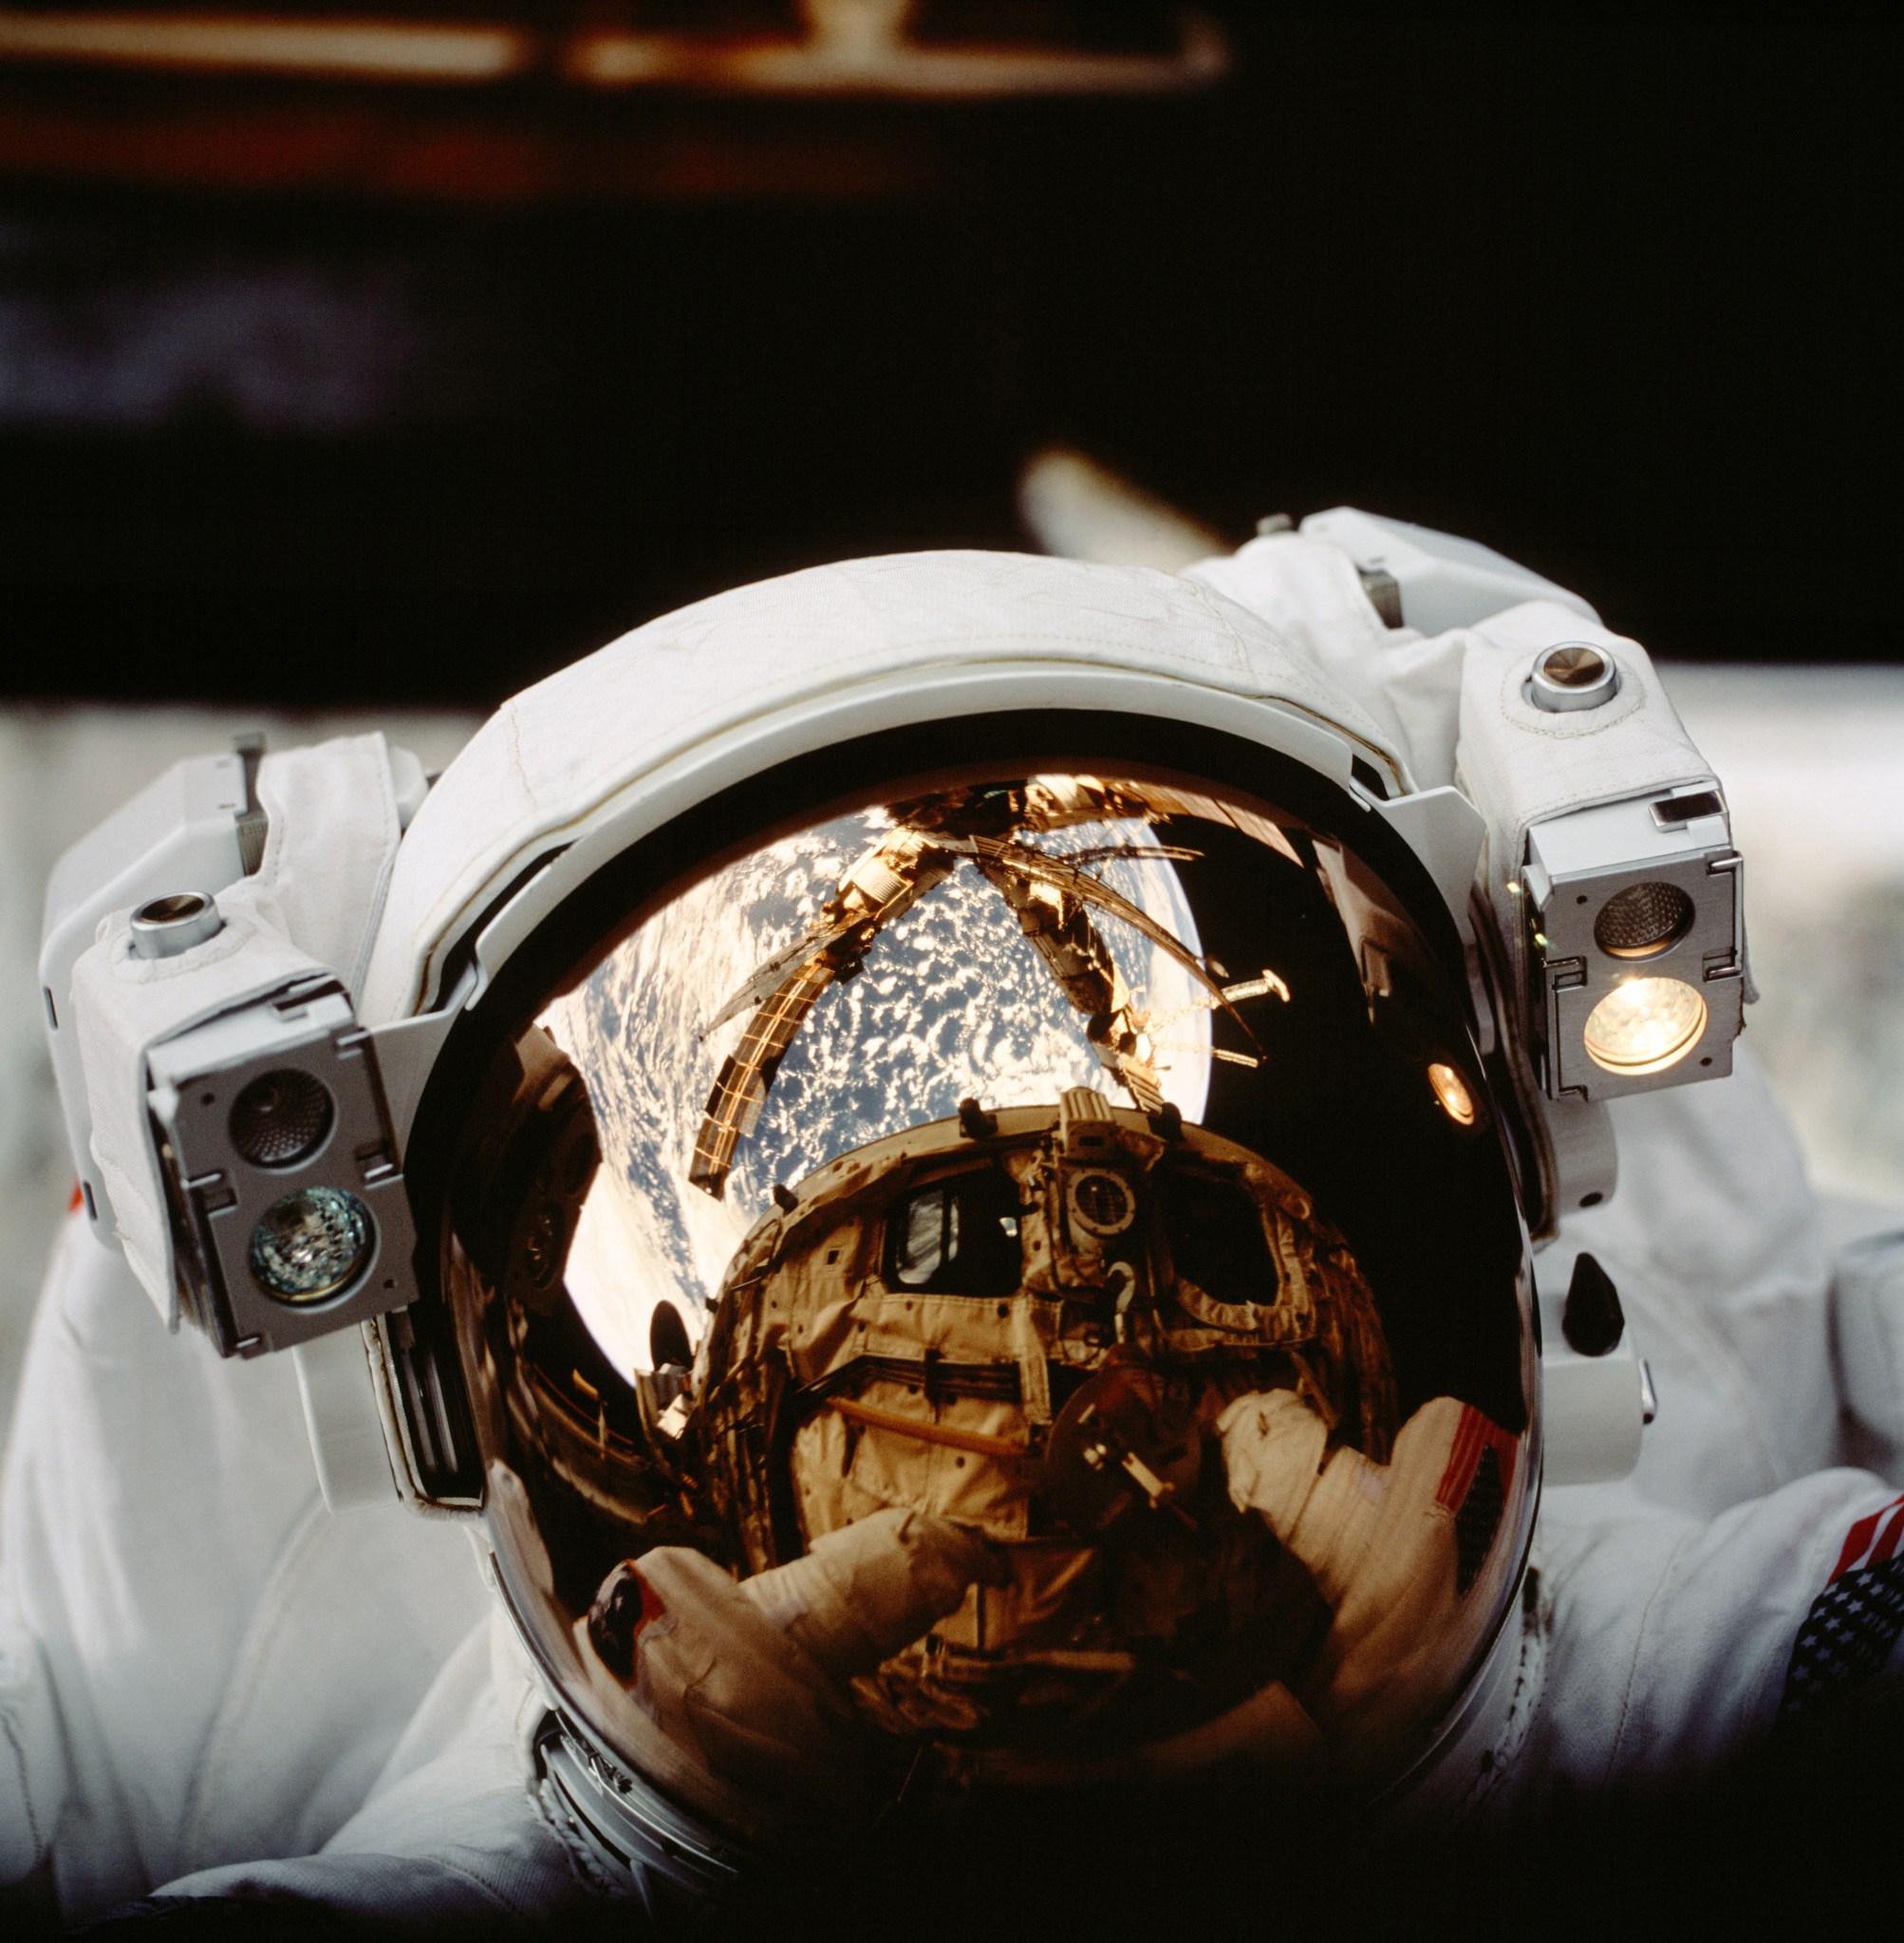 The helmet visor of astronaut Scott F. Parazynski reflects the space shuttle Atlantis’ cargo bay and Russia’s Mir Space Station as well as Earth’s horizon during an EVA.